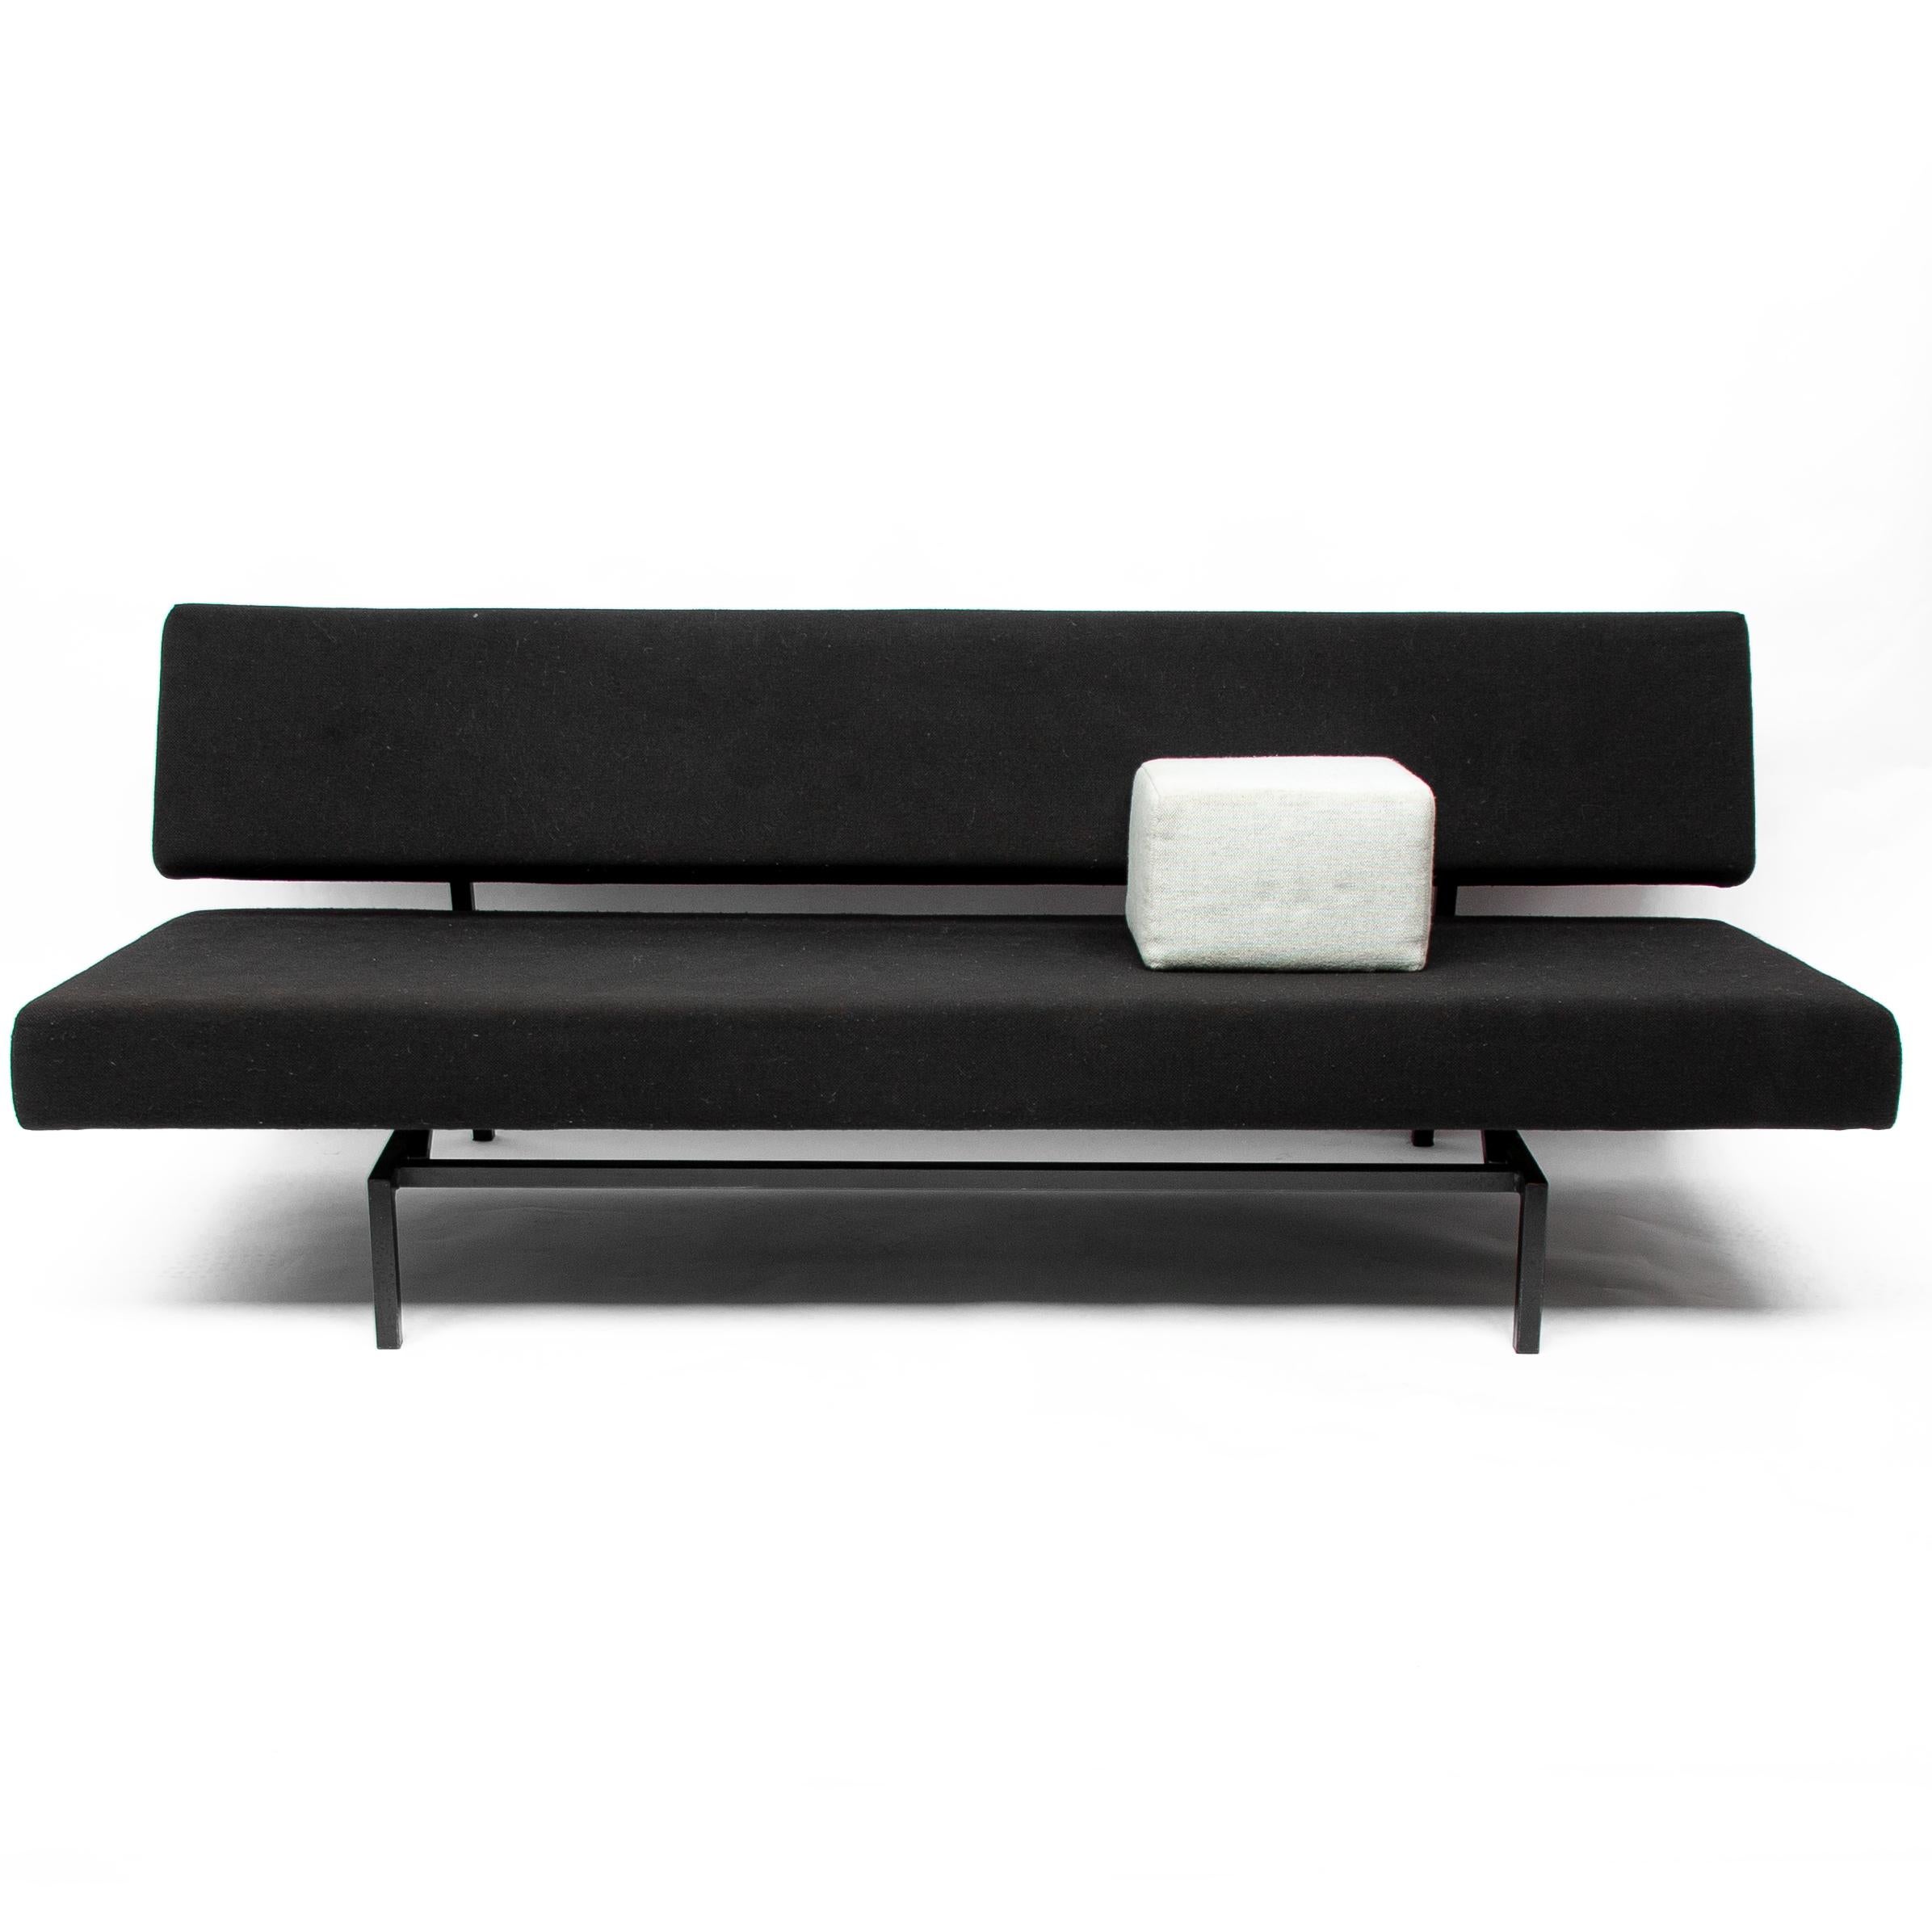 Wonderfull Dutch Minimalist modern design sofa or daybed model “BR02” designed by Martin Visser for Spectrum, 1960s. Magnificent minimalist design with black frame and grey cubic armrest. The sofa can be turned into a daybed in a manner of seconds